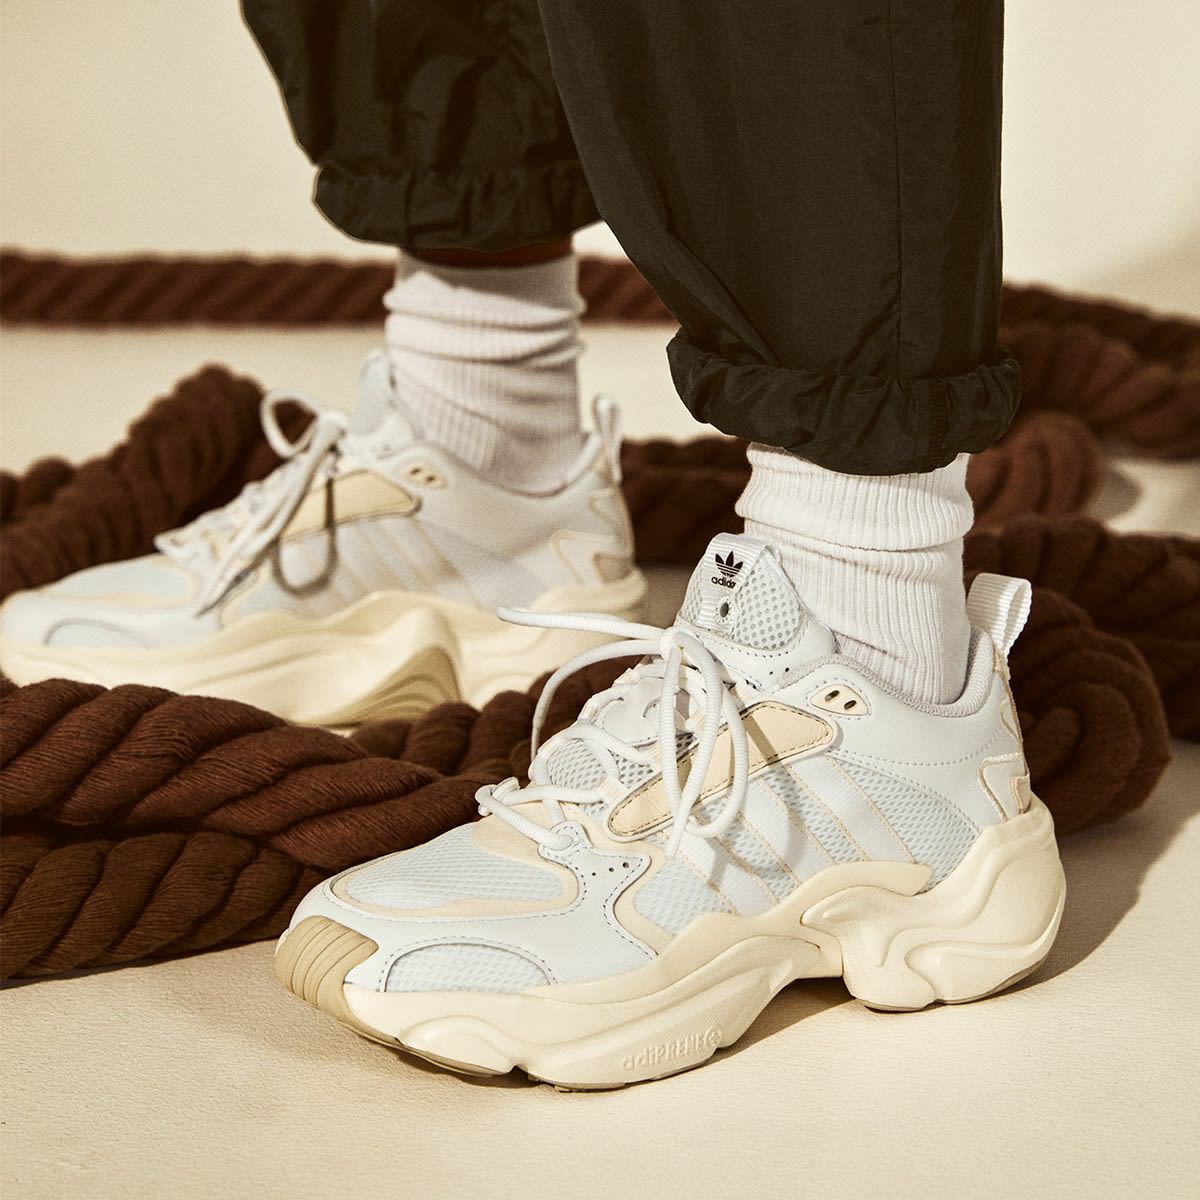 Adidas Consortium x Naked Magmur Runner W (White) | END. Launches